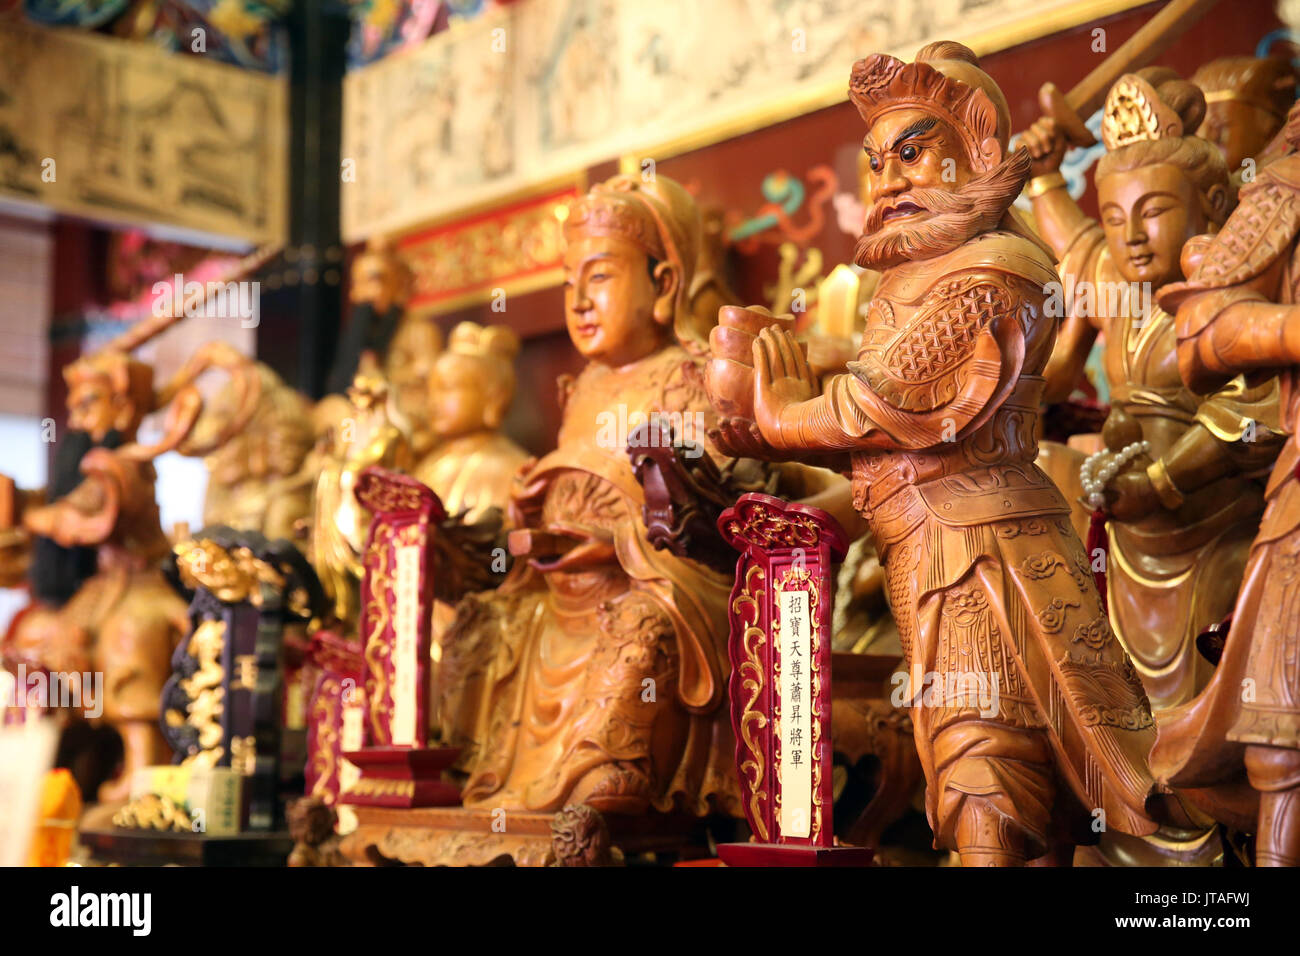 Taoist Pantheon, Yu Huang Gong Temple of Heavenly Jade Emperor, Singapore, Southeast Asia, Asia Stock Photo